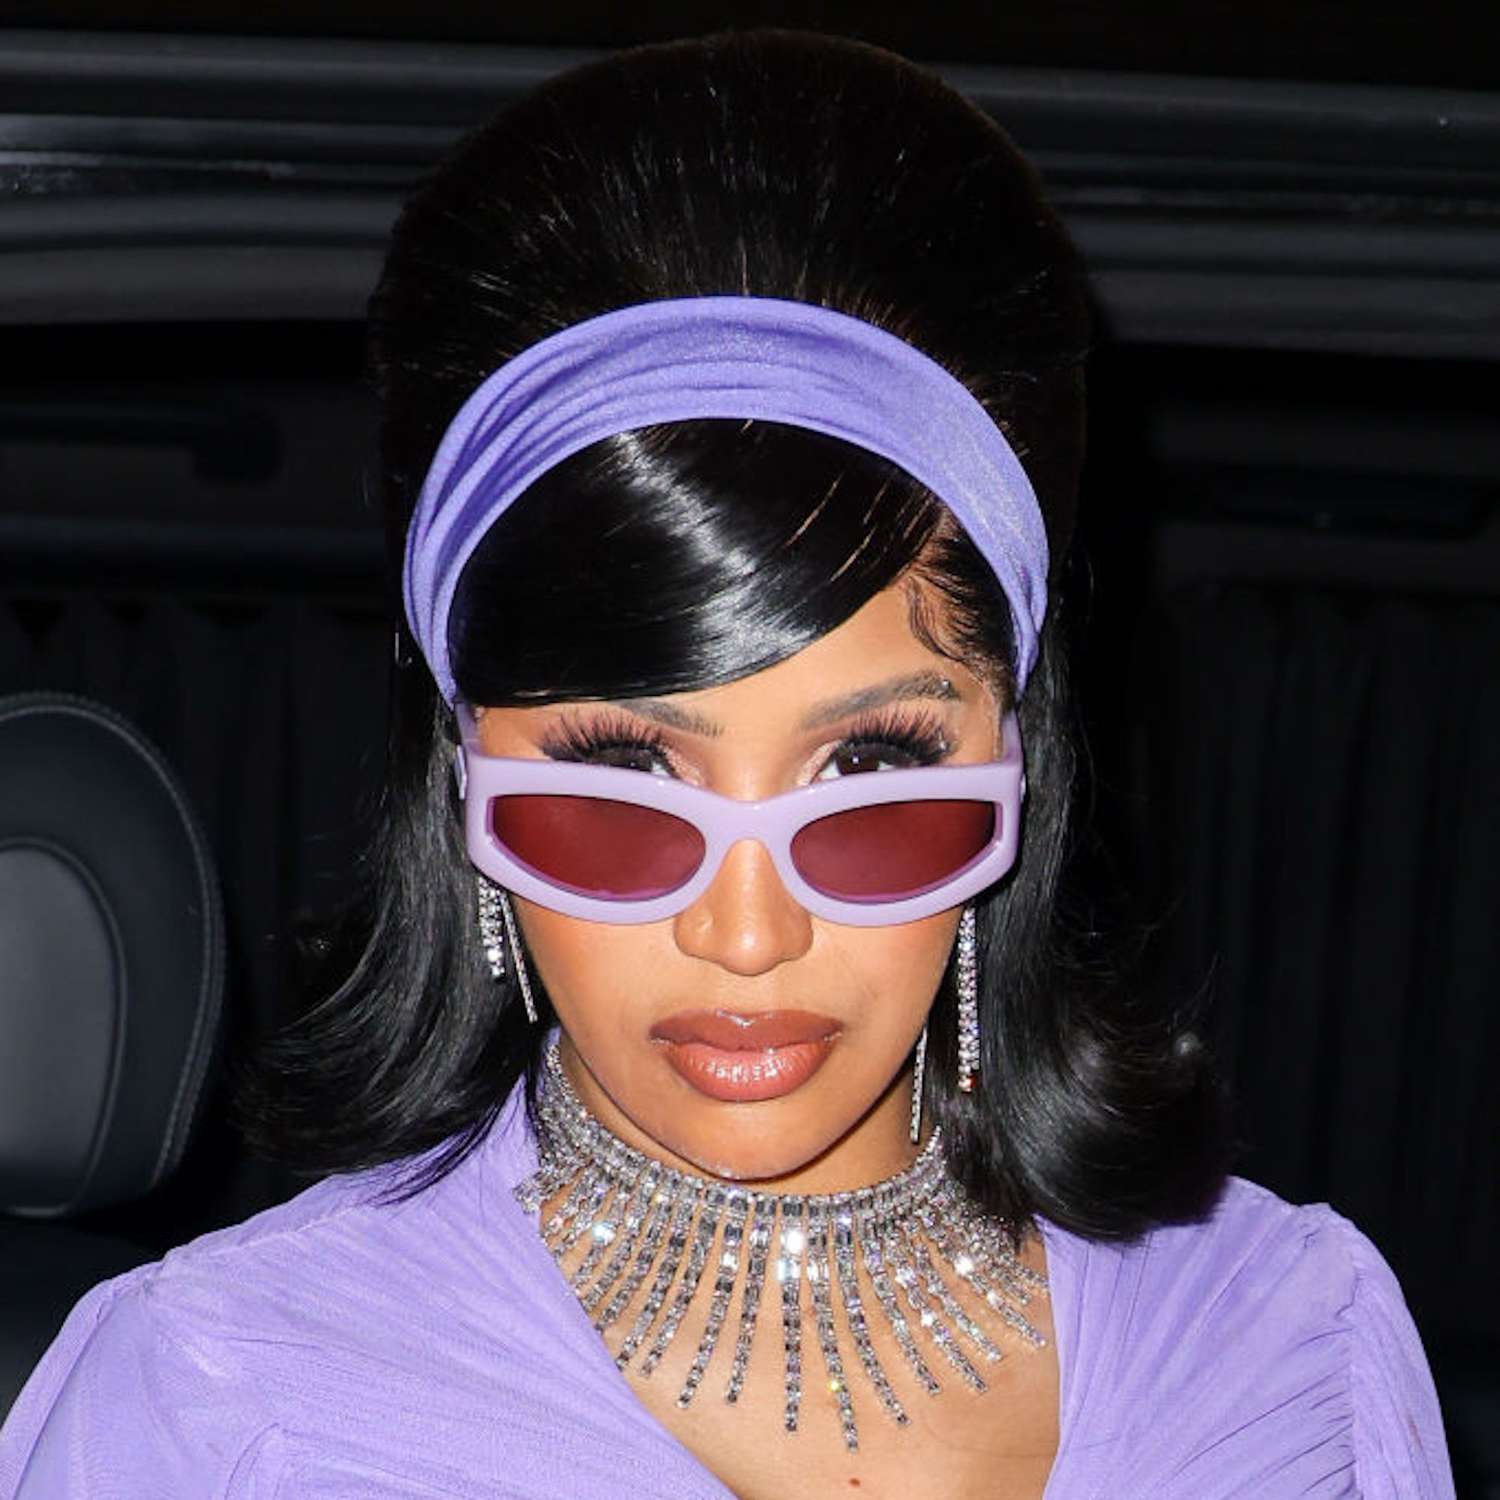 Cardi B with a bouffant and a purple headband, looking over her pink sunglasses